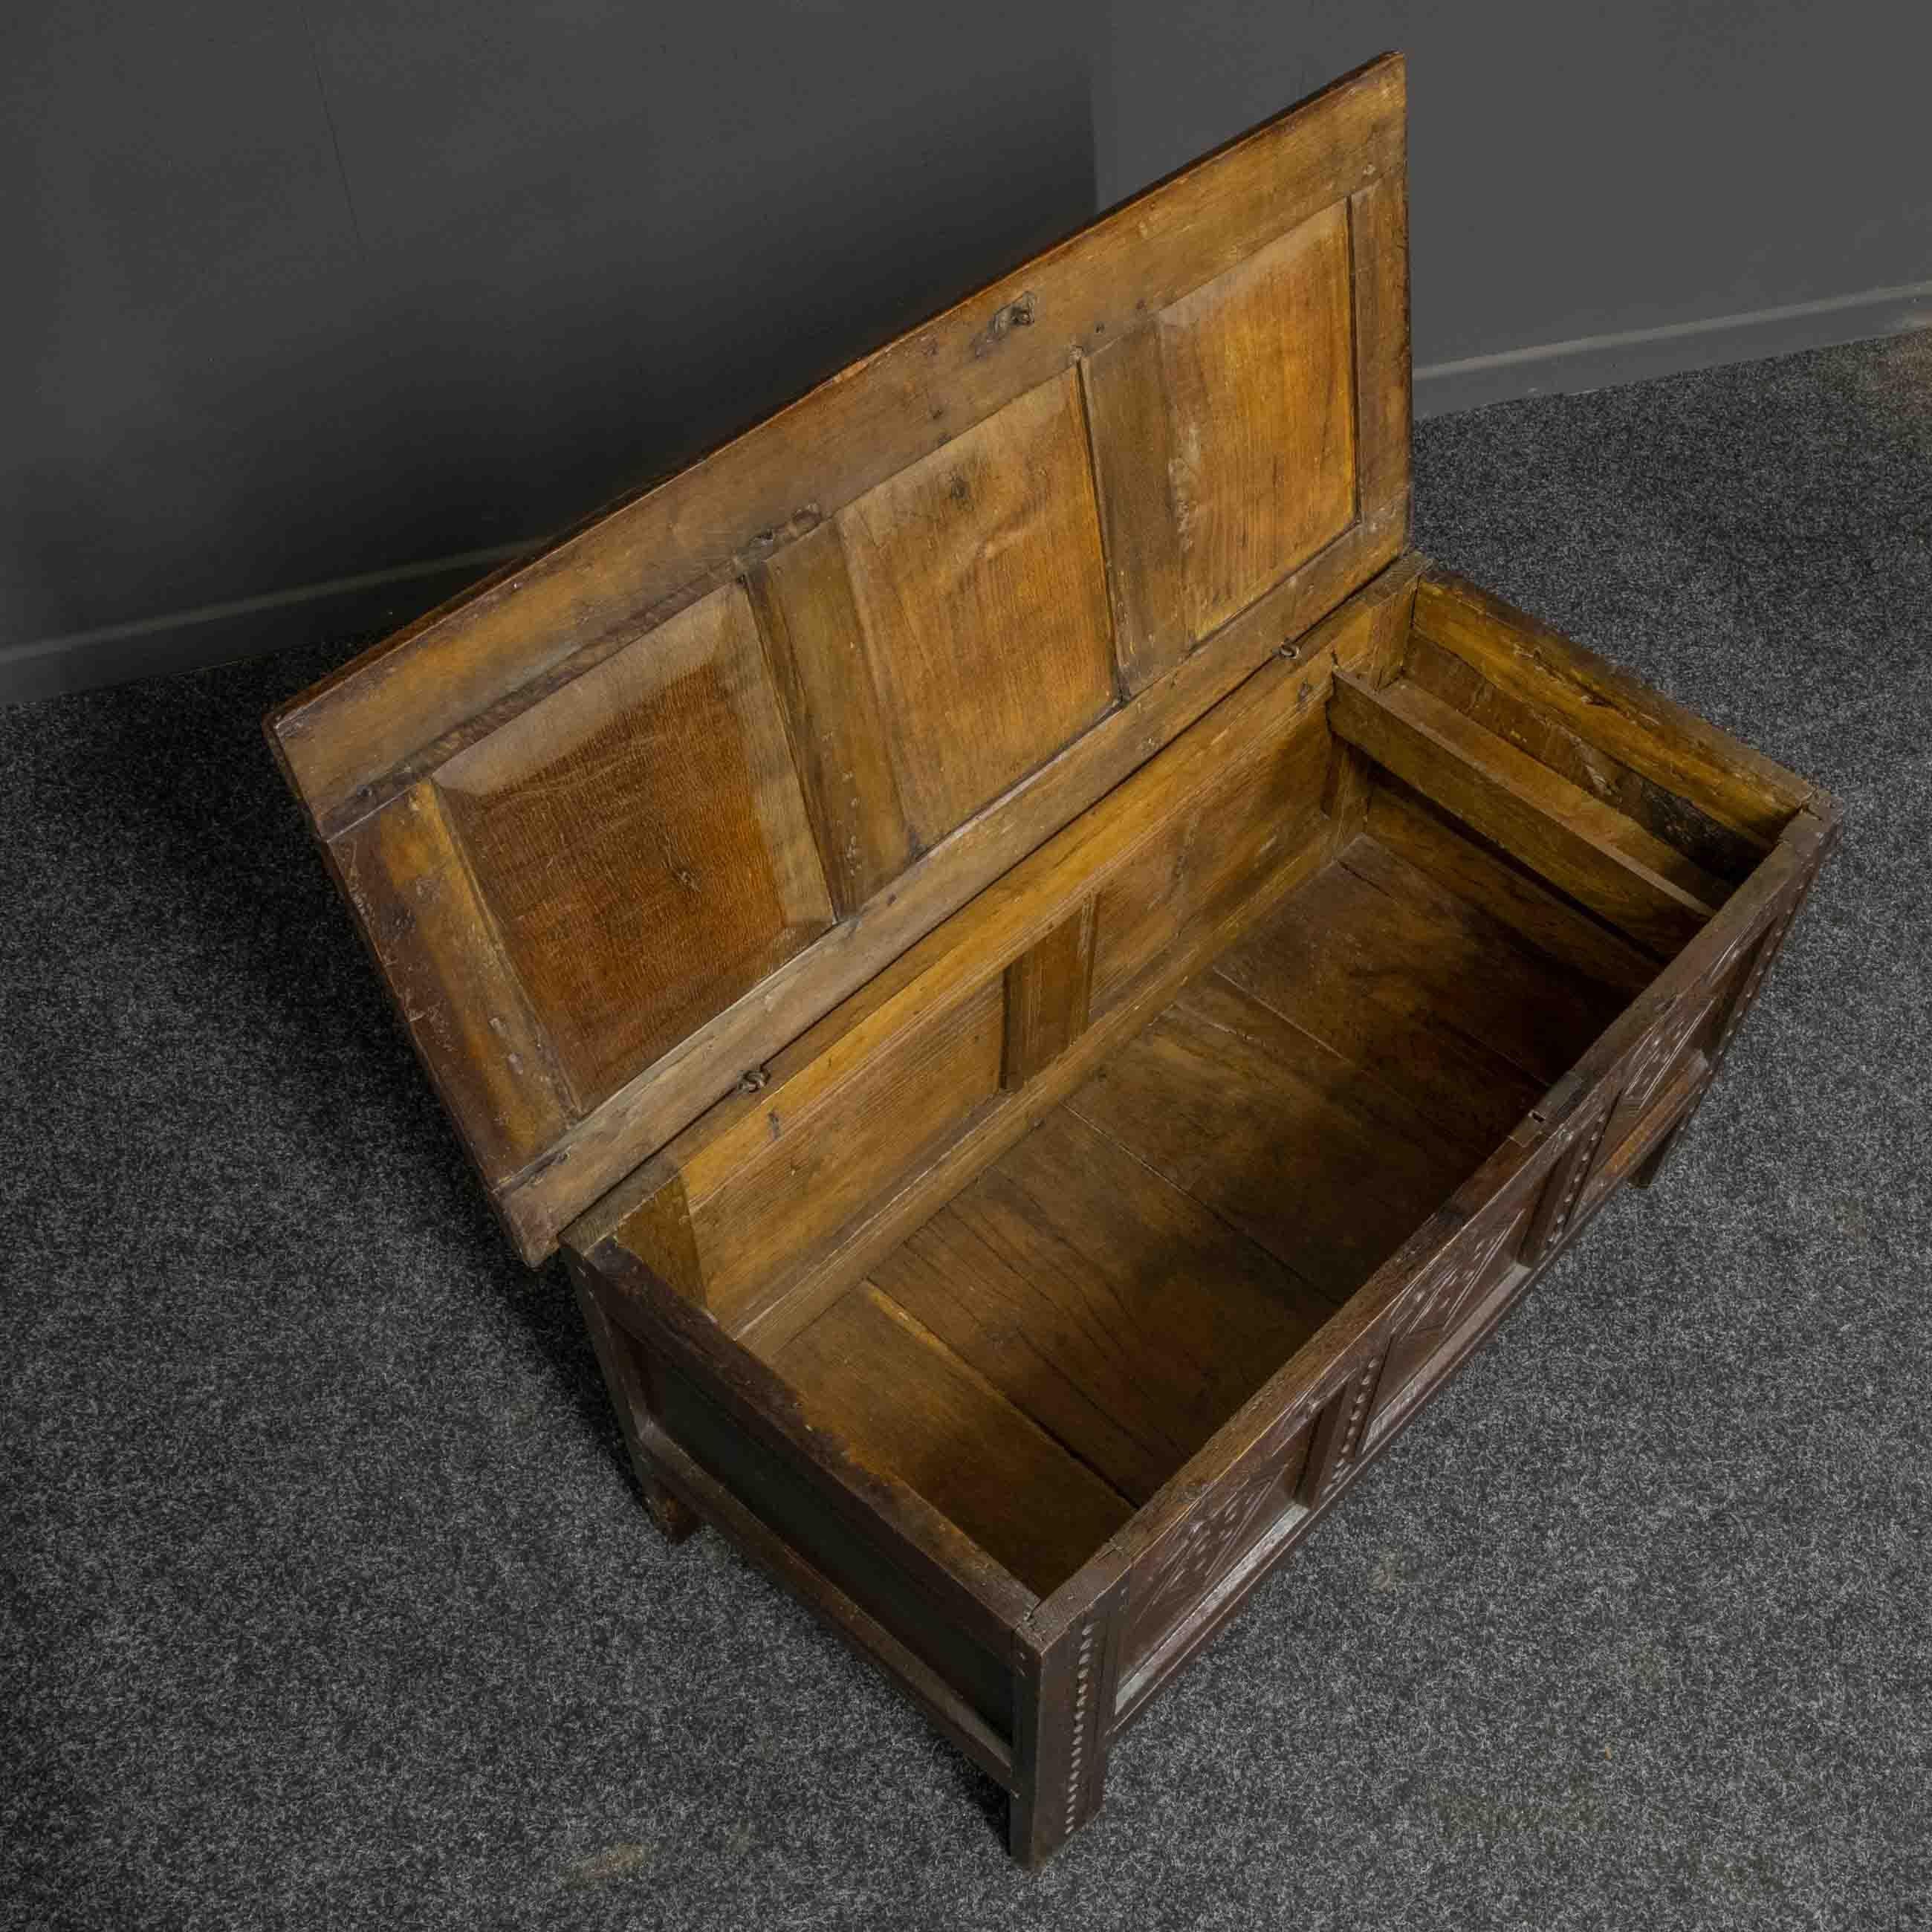 A fine example of a mid-late 17th century oak bedding box. This piece is virtually as it was made, with only the Victorian steel lock a replacement. With over 300 years of dusting and polishing the patina is wonderful. The panelled top has no